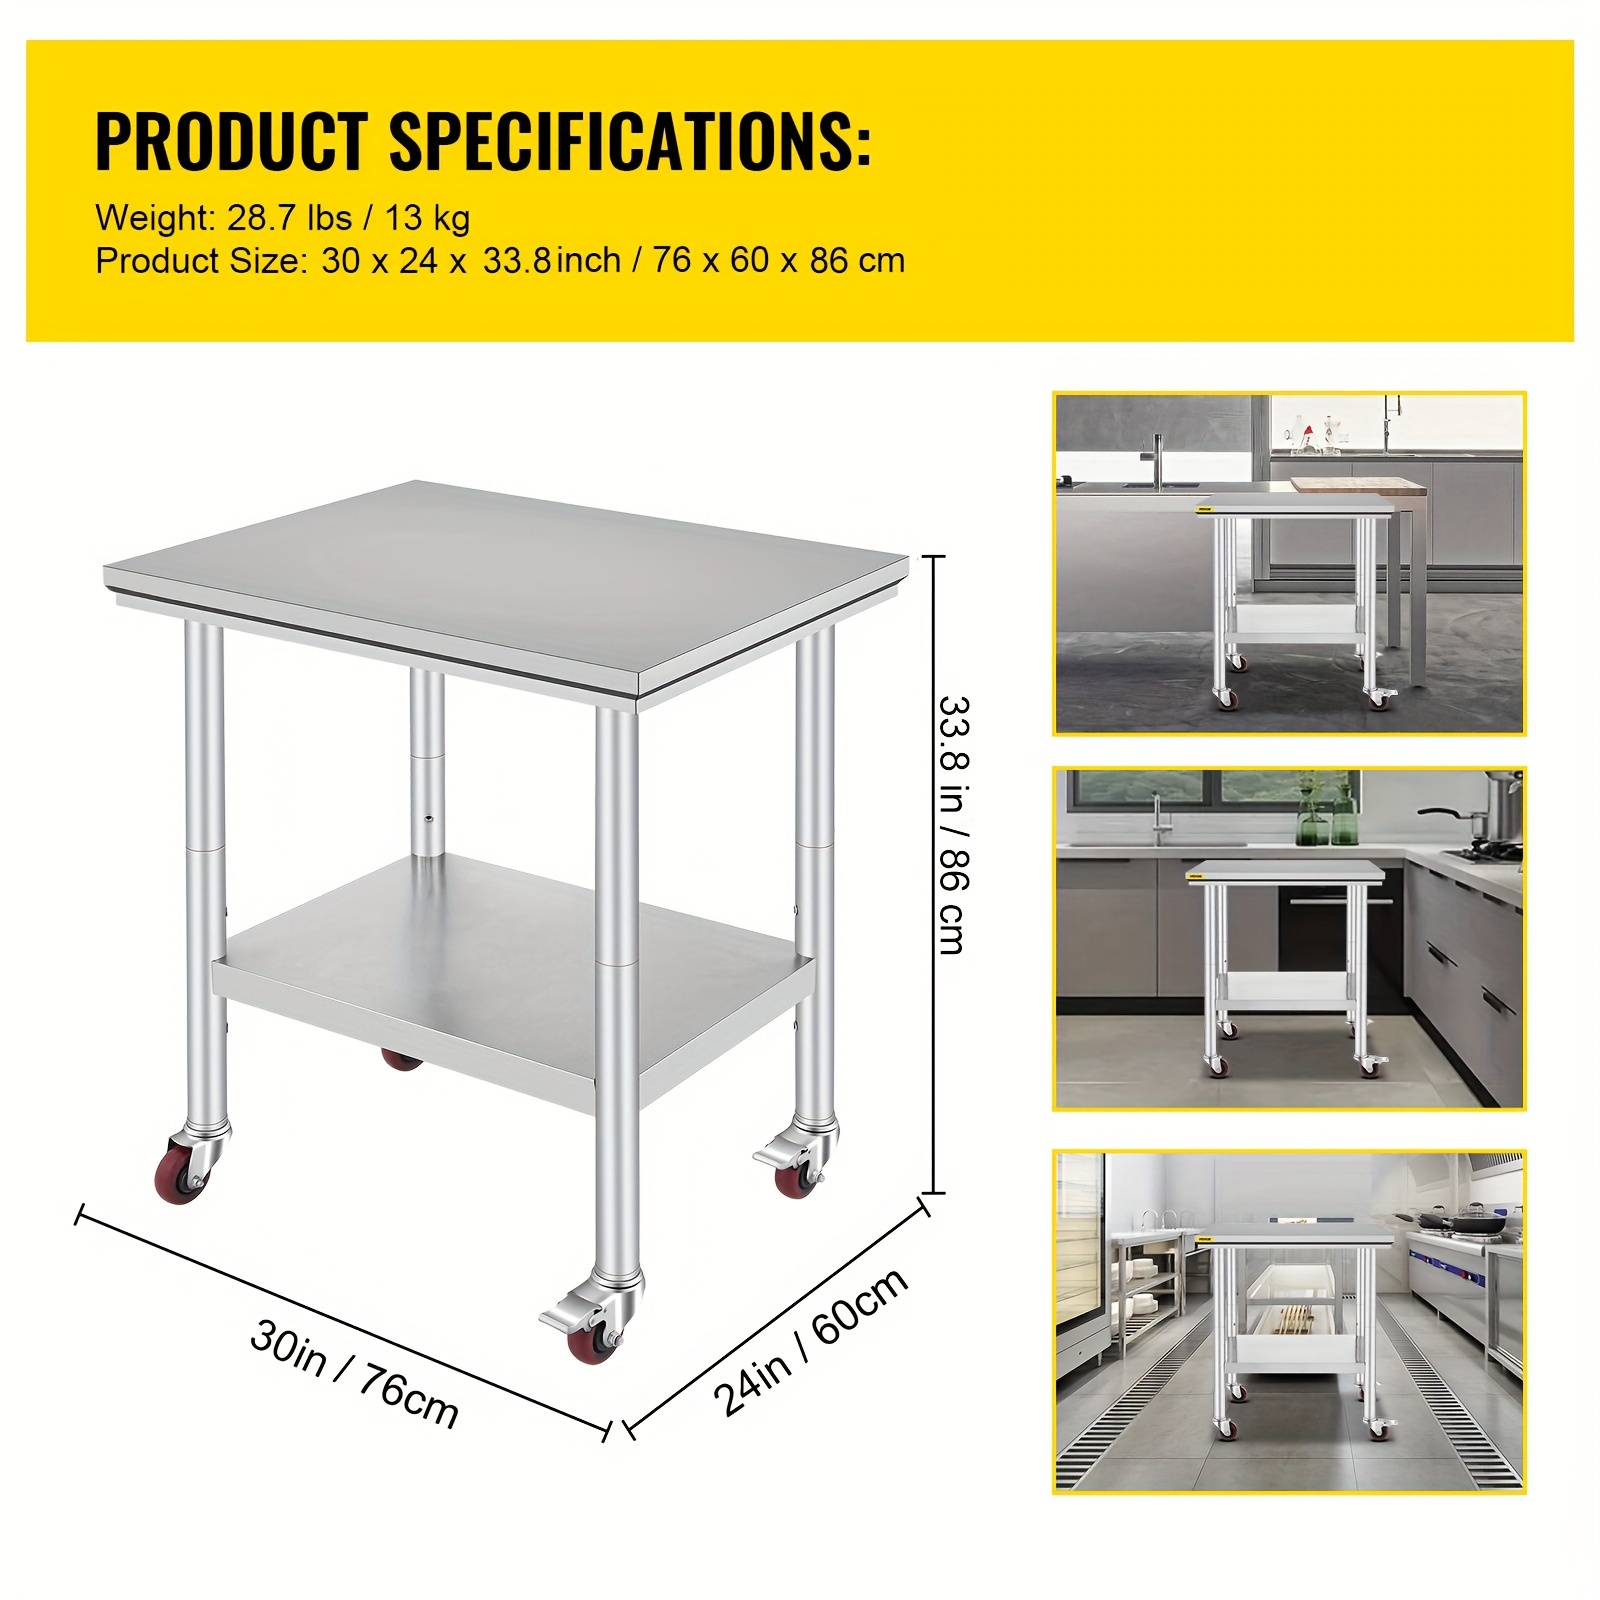 

Stainless Steel Work Table With Wheels 24 X 30/24 X 36 Prep Table With Casters Heavy Duty Work Table For Commercial Kitchen Restaurant Business (24 X 30 X 33.8 Inch)